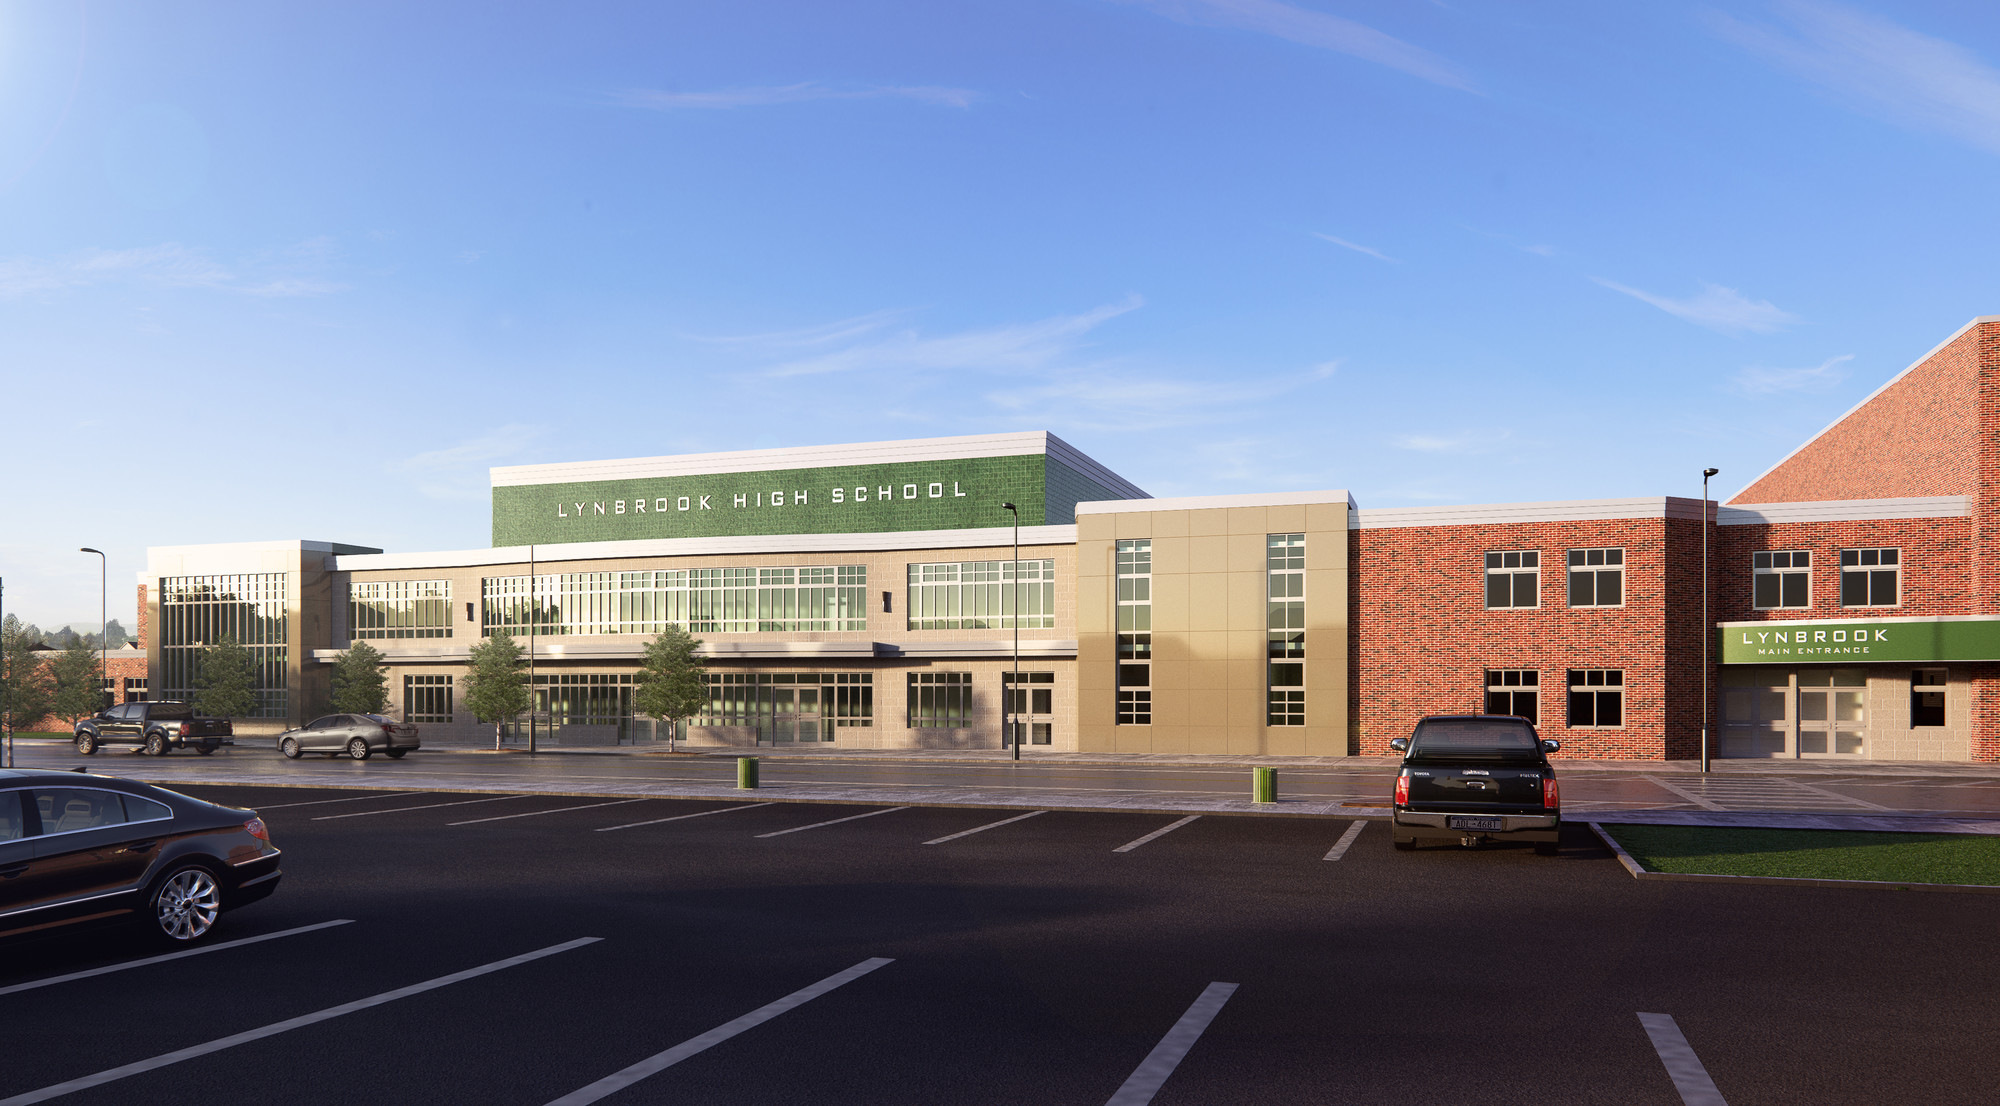 An artist’s rendering of what the completed high school would look like if the March 15 bond vote passes.